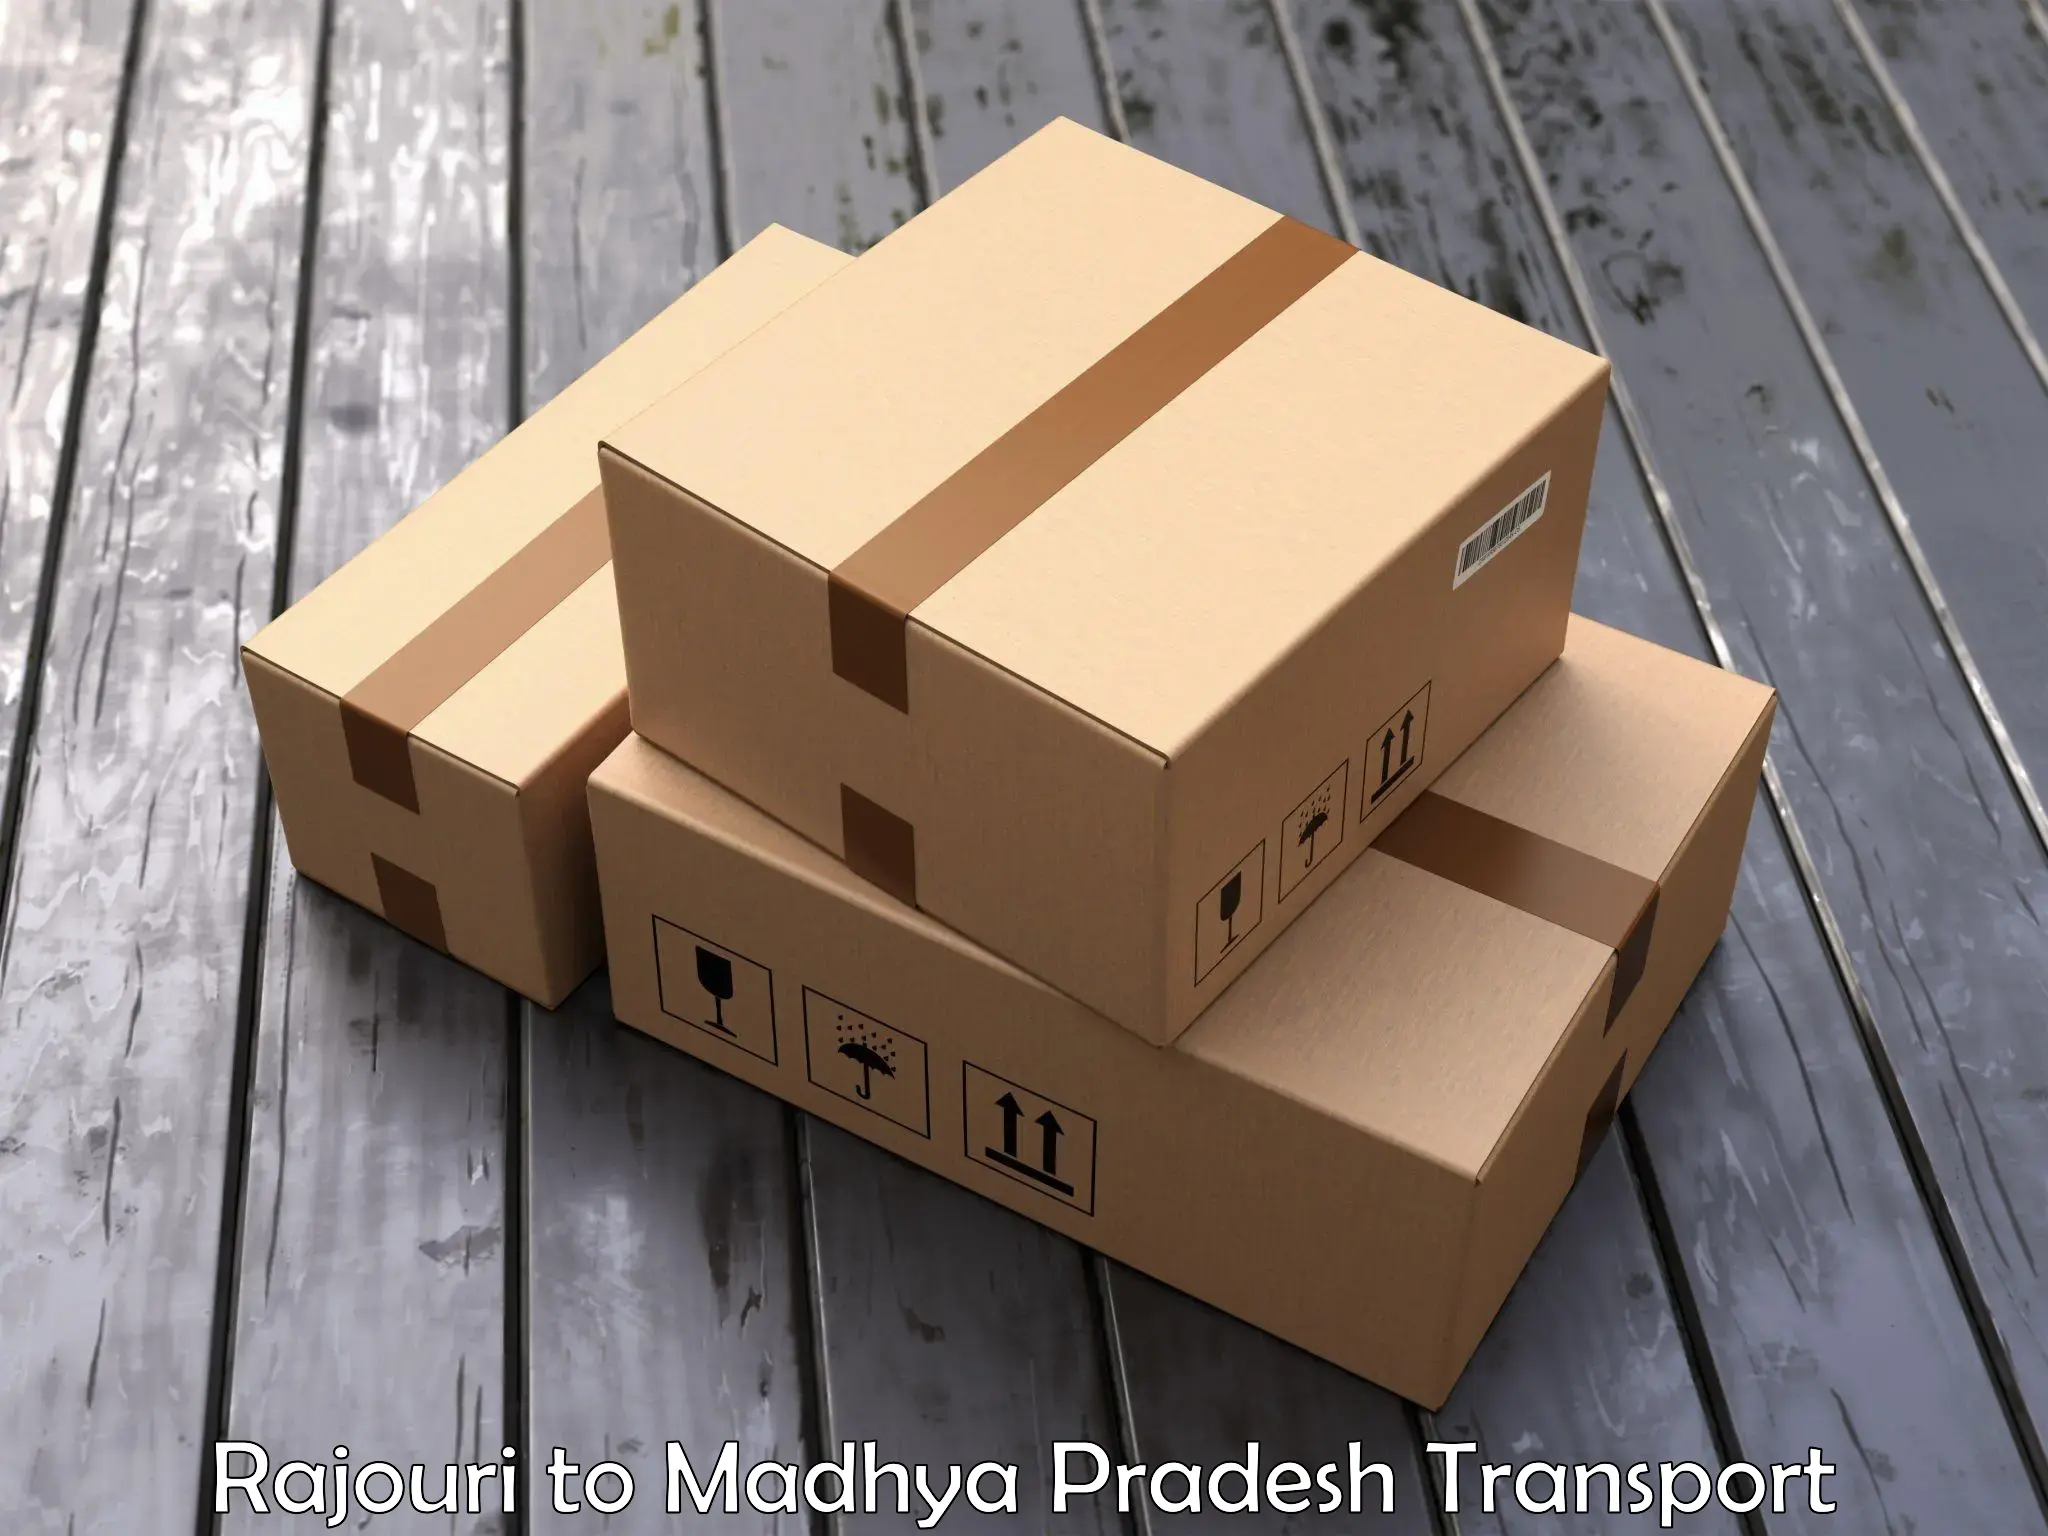 Two wheeler transport services Rajouri to Indore